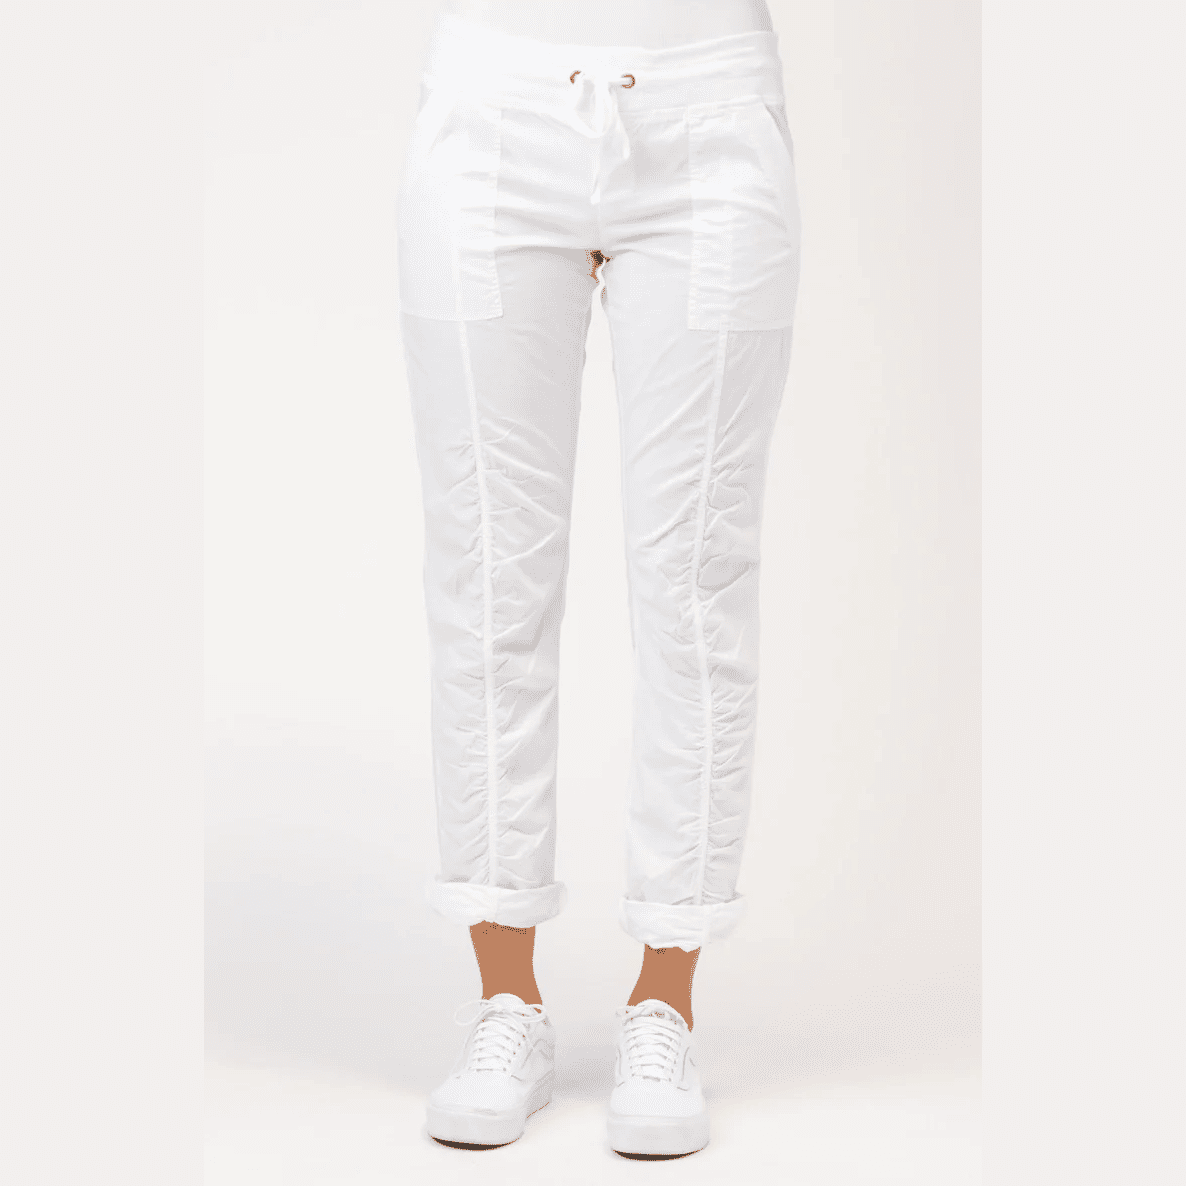 XCVI Wearables Jules Ruching Pants in White - Jaunts Boutique 